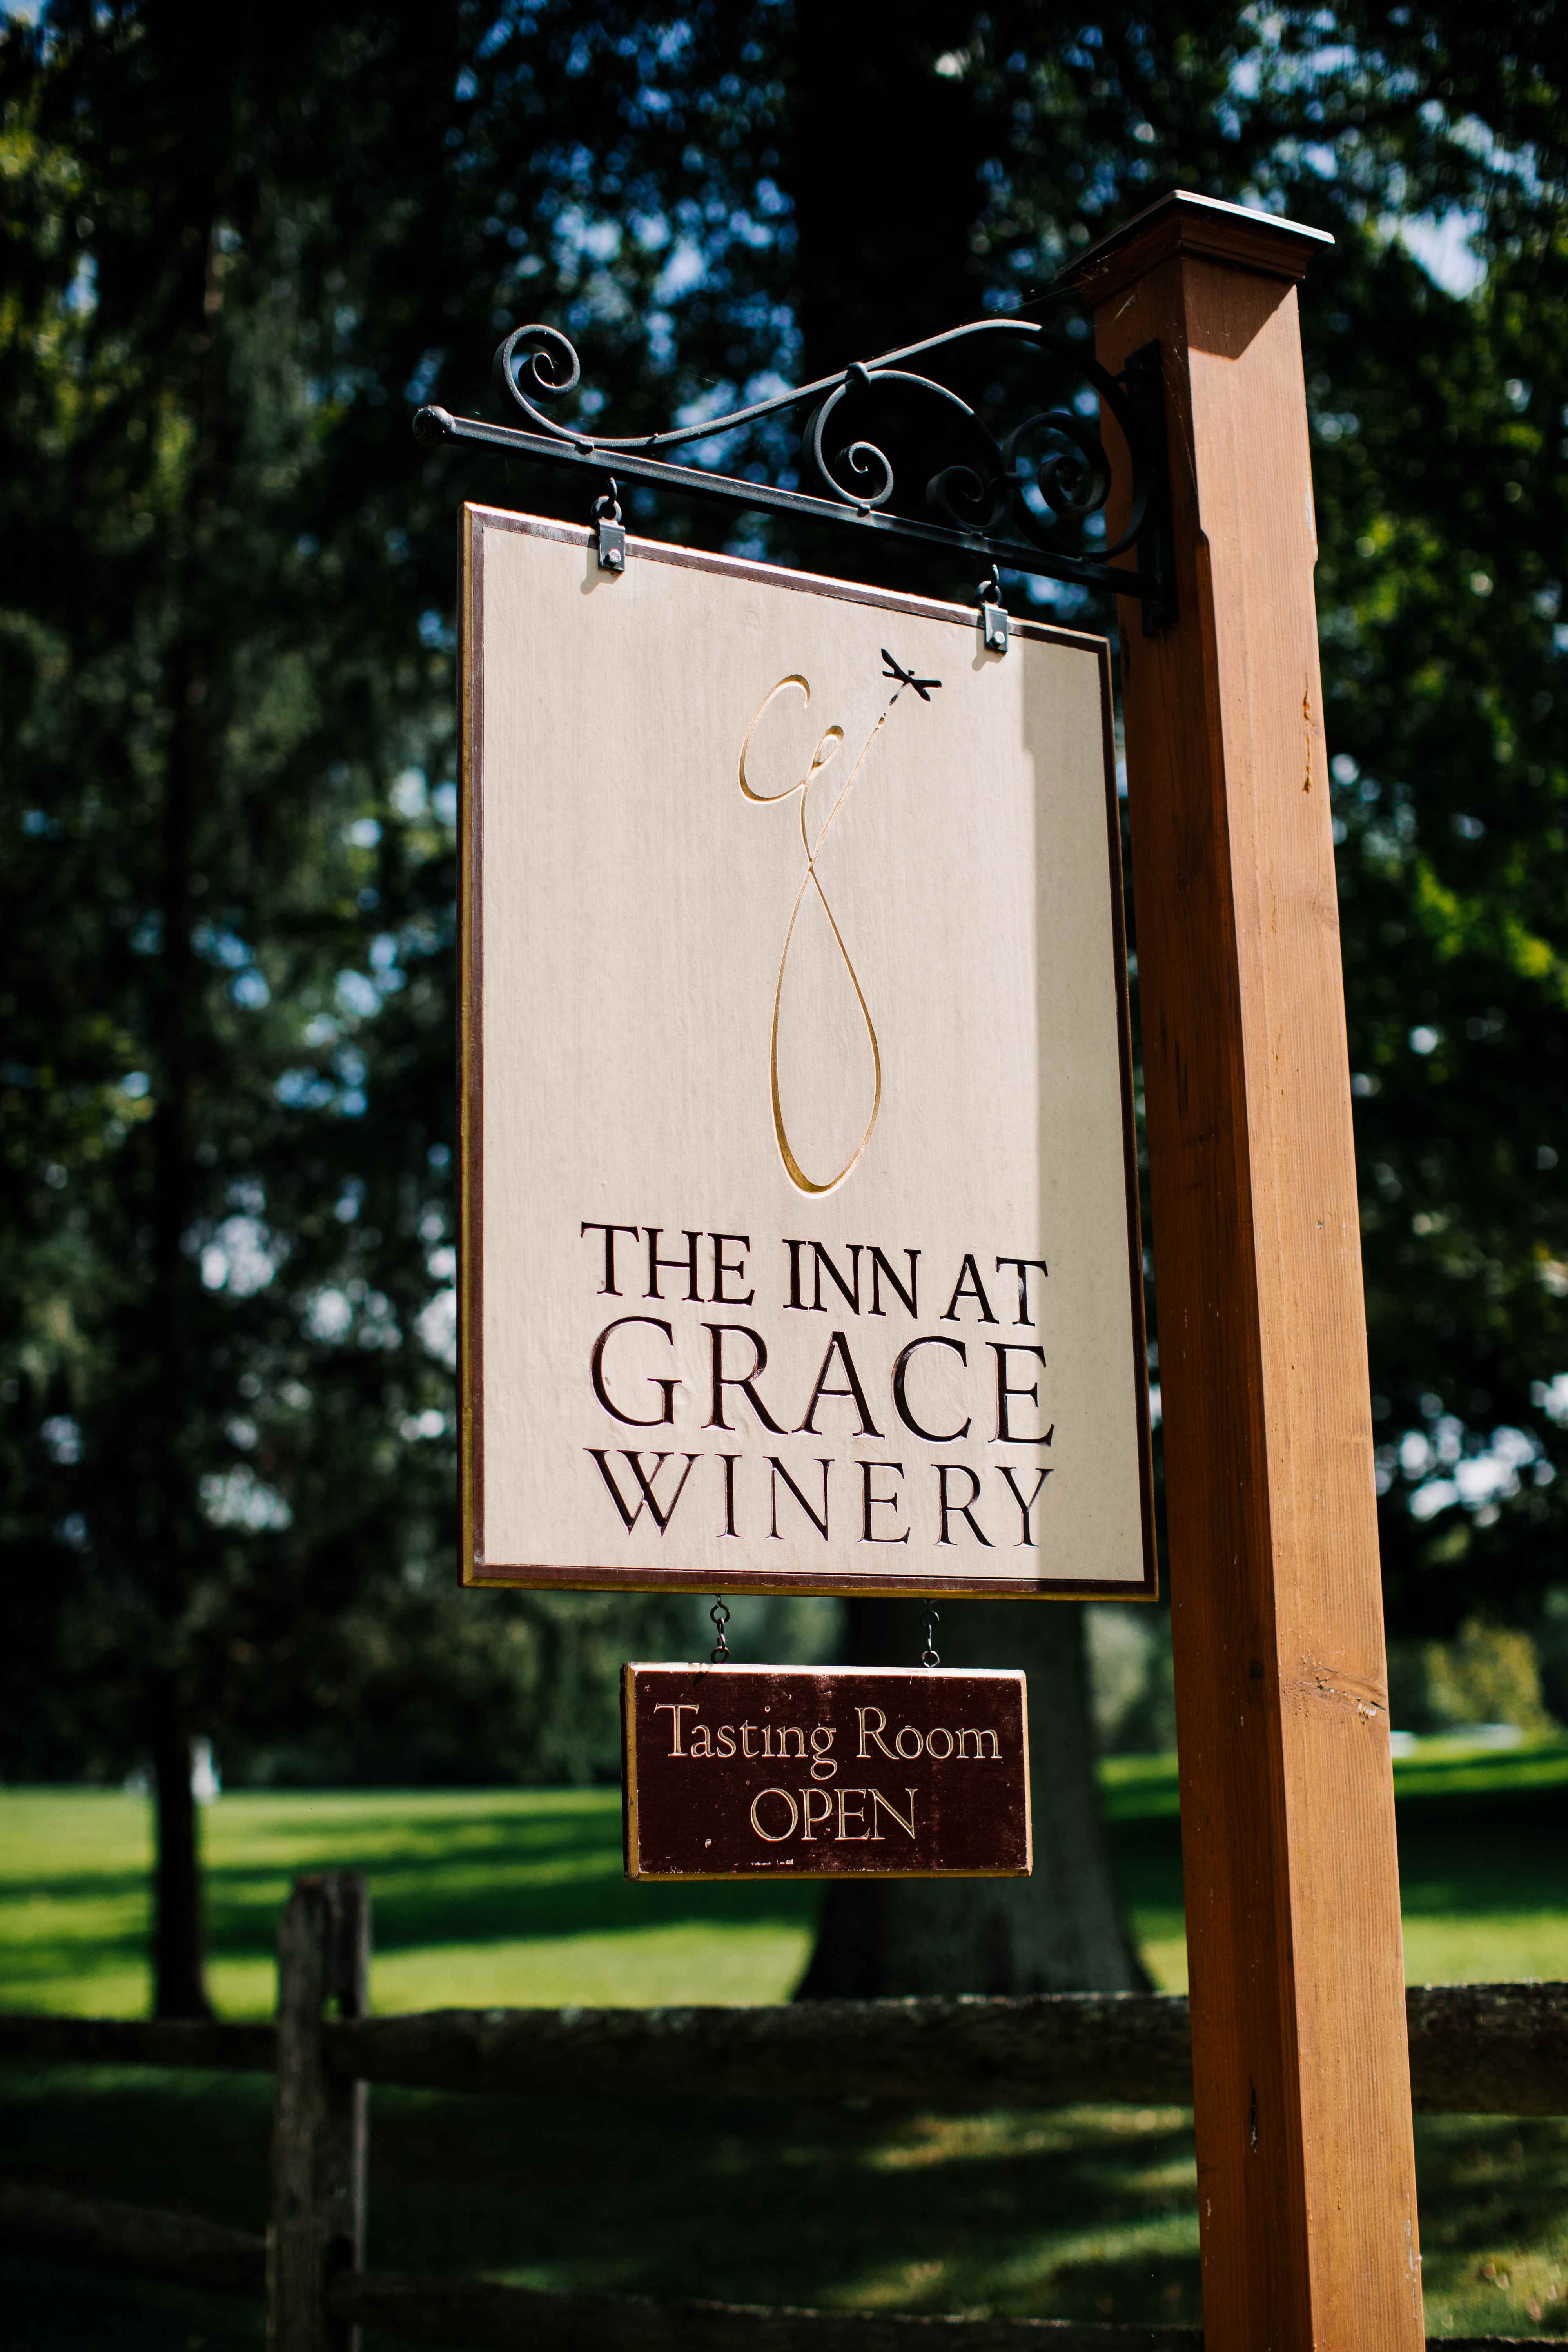 The signage for The Inn at Grace Winery